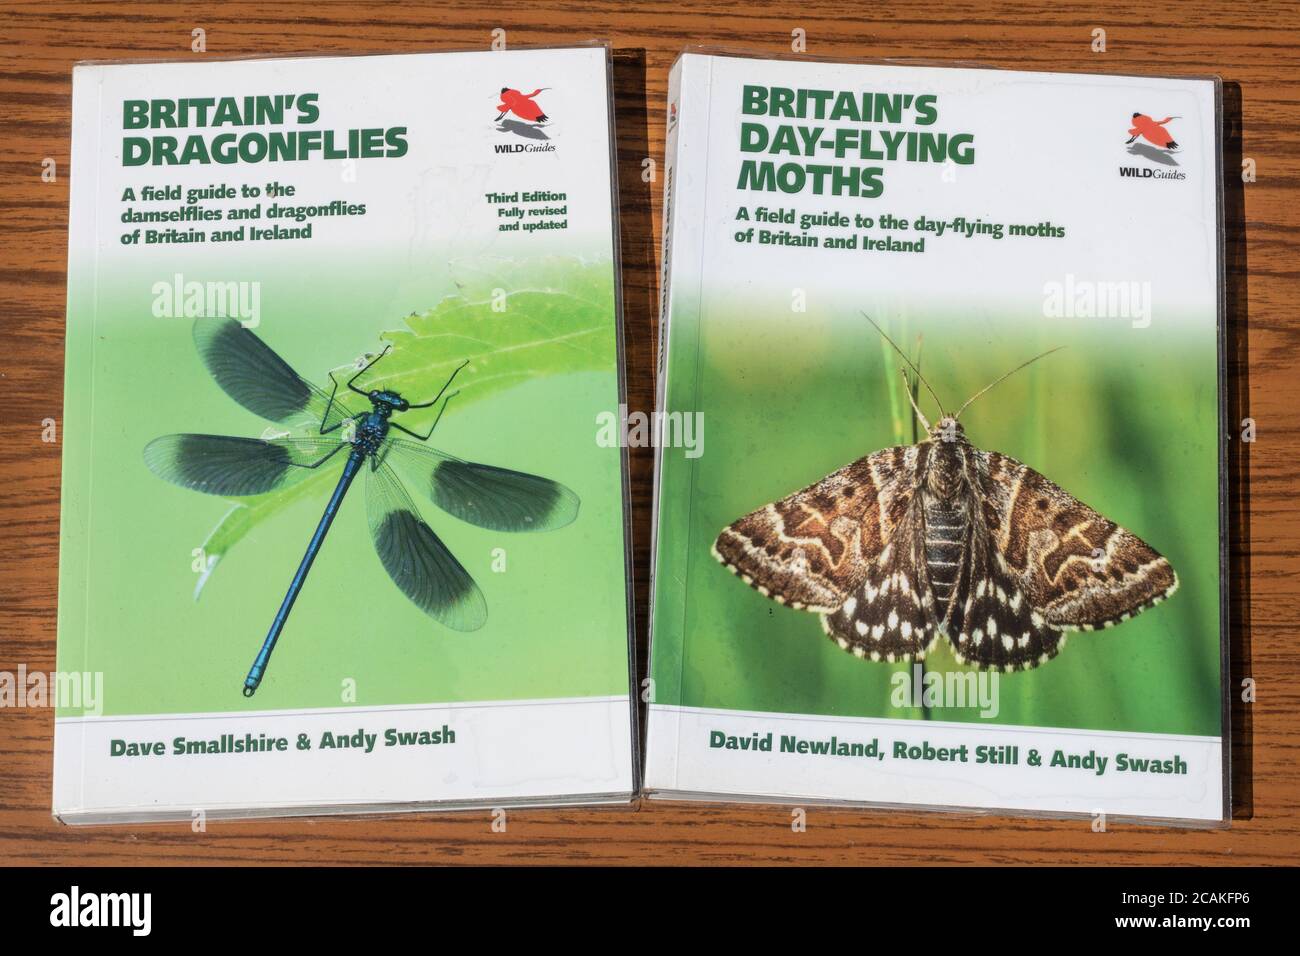 Wildlife books, field guides, identification of britain's dragonflies and day-flying moths by Wild Guides Stock Photo